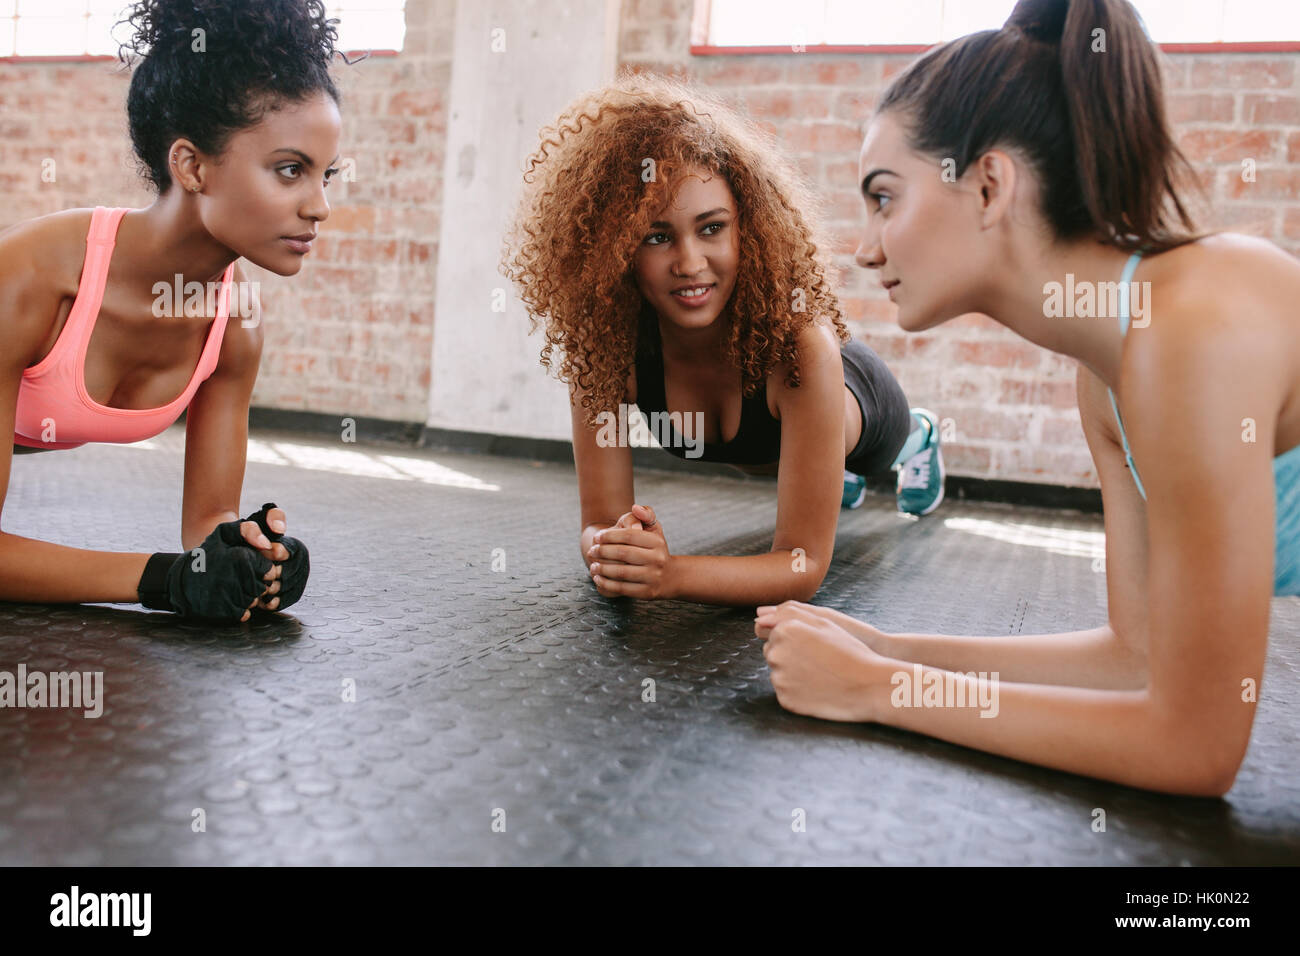 Three young women doing pushups together in gym. Group of female working out in healthclub. Stock Photo